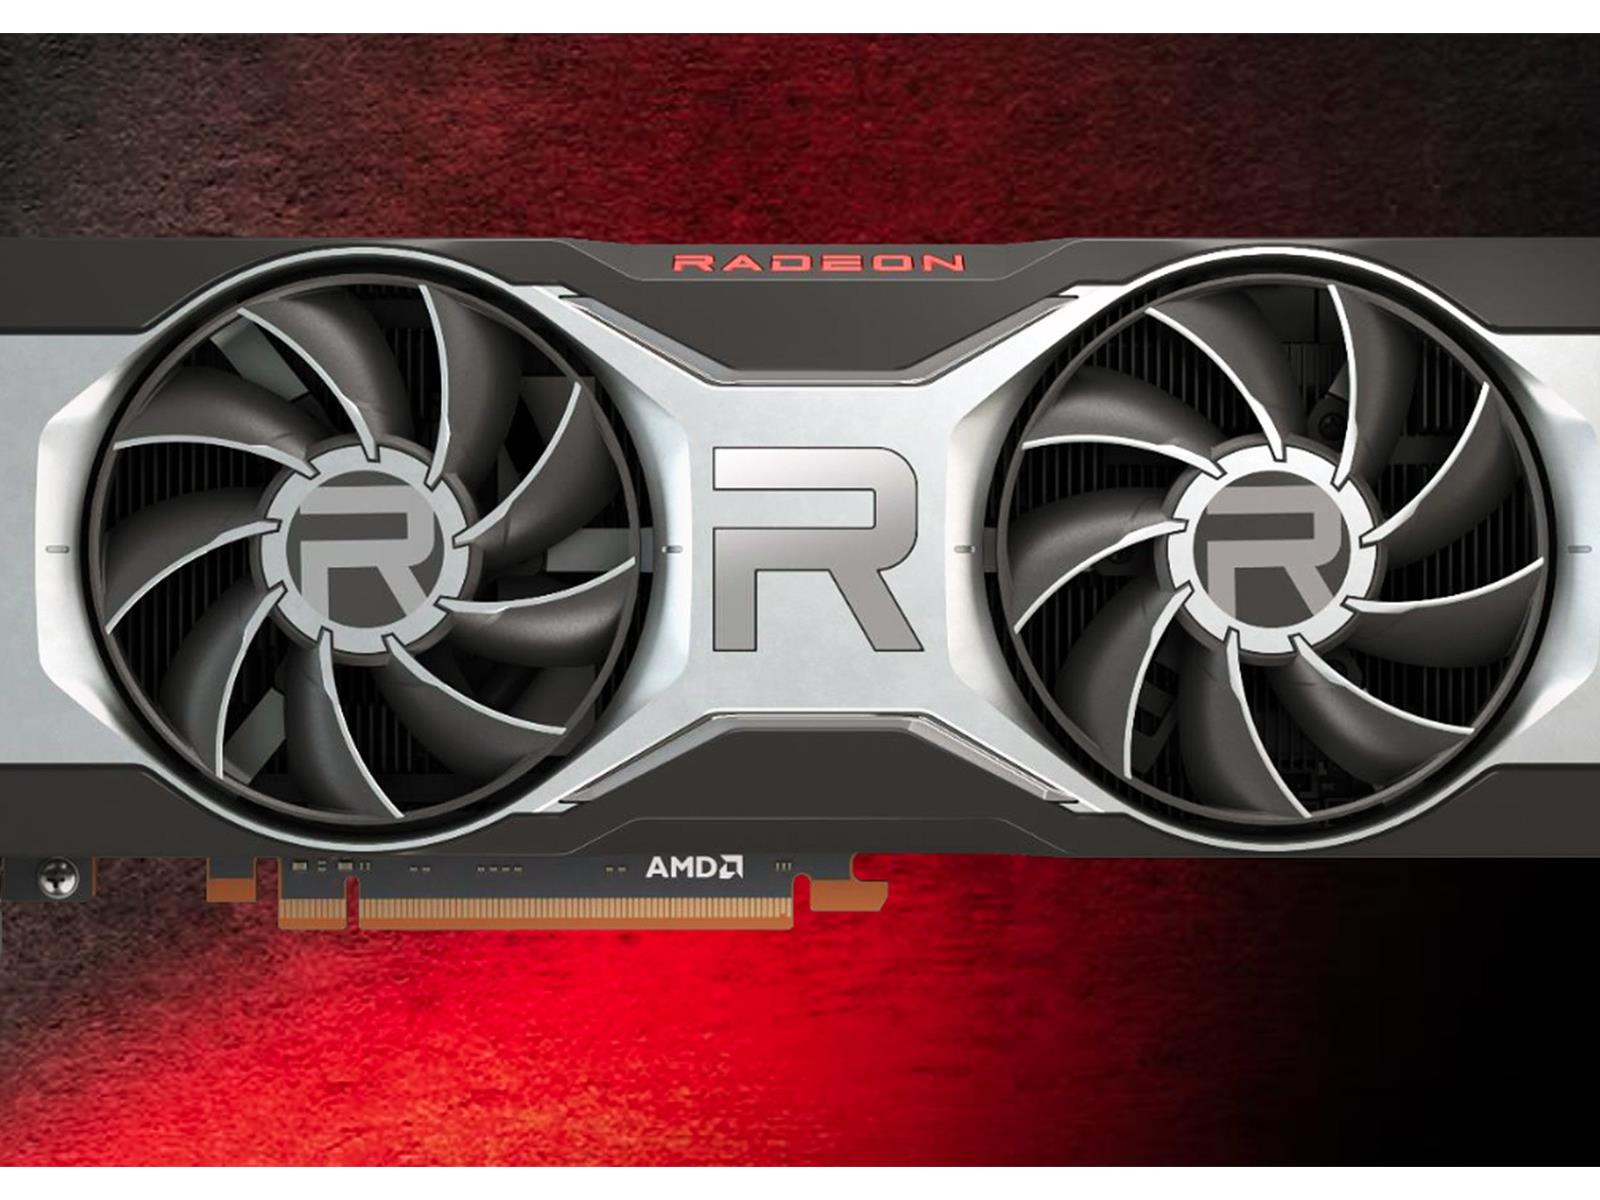 AMD Radeon RX 6700 XT: A Deep Dive into Performance and User Experience -  GadgetMates